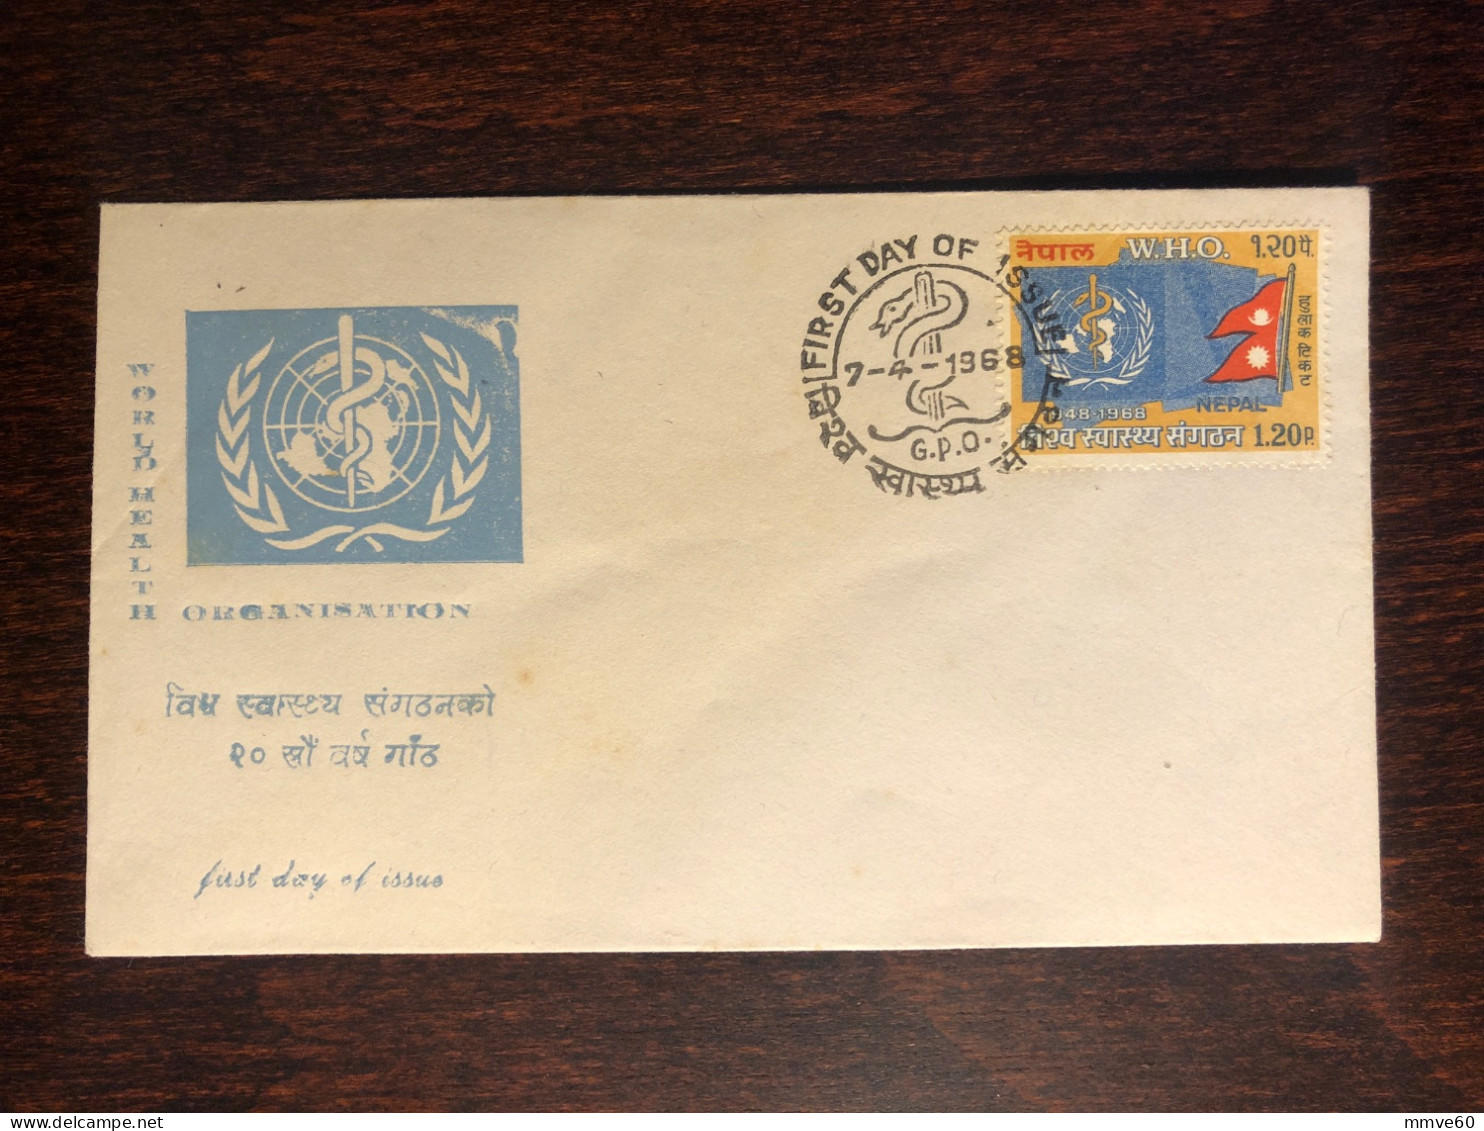 NEPAL FDC COVER 1968 YEAR WHO HEALTH MEDICINE STAMPS - Népal